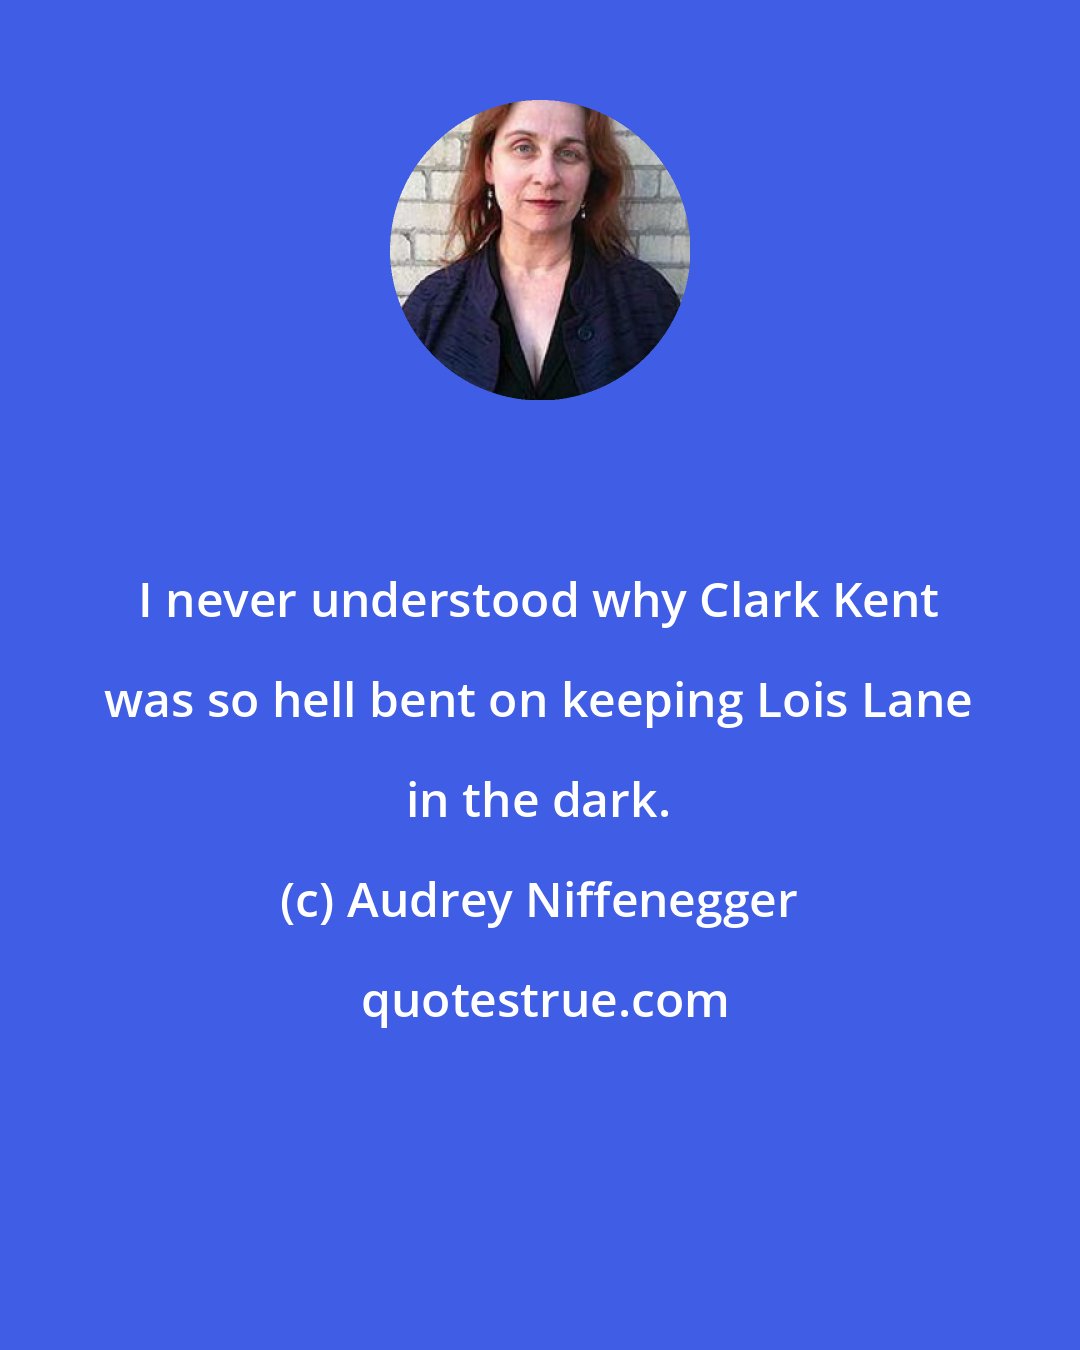 Audrey Niffenegger: I never understood why Clark Kent was so hell bent on keeping Lois Lane in the dark.